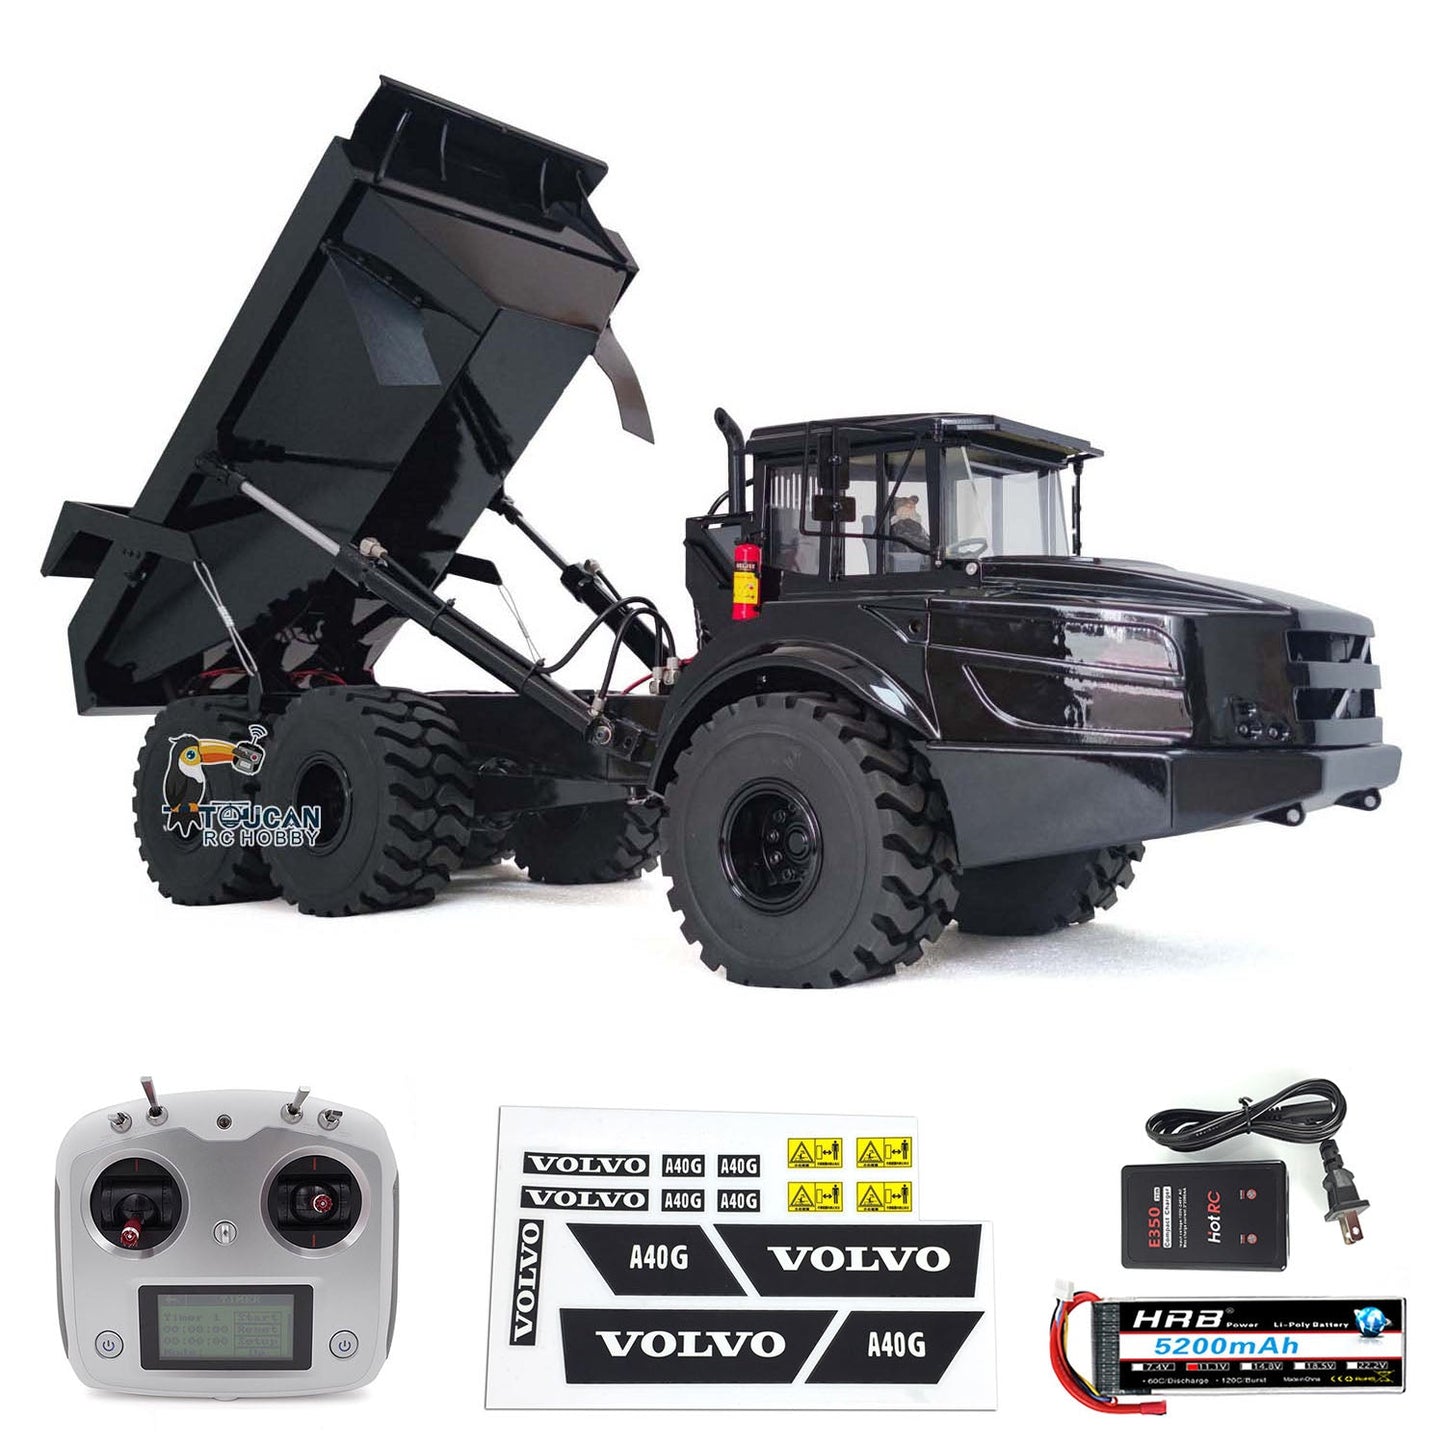 XDRC Metal 1/14 RC Hydraulic Articulated Truck A40G 6*6 Radio Controlled Dumper Tipper RTR Car Model Construction Vehicles